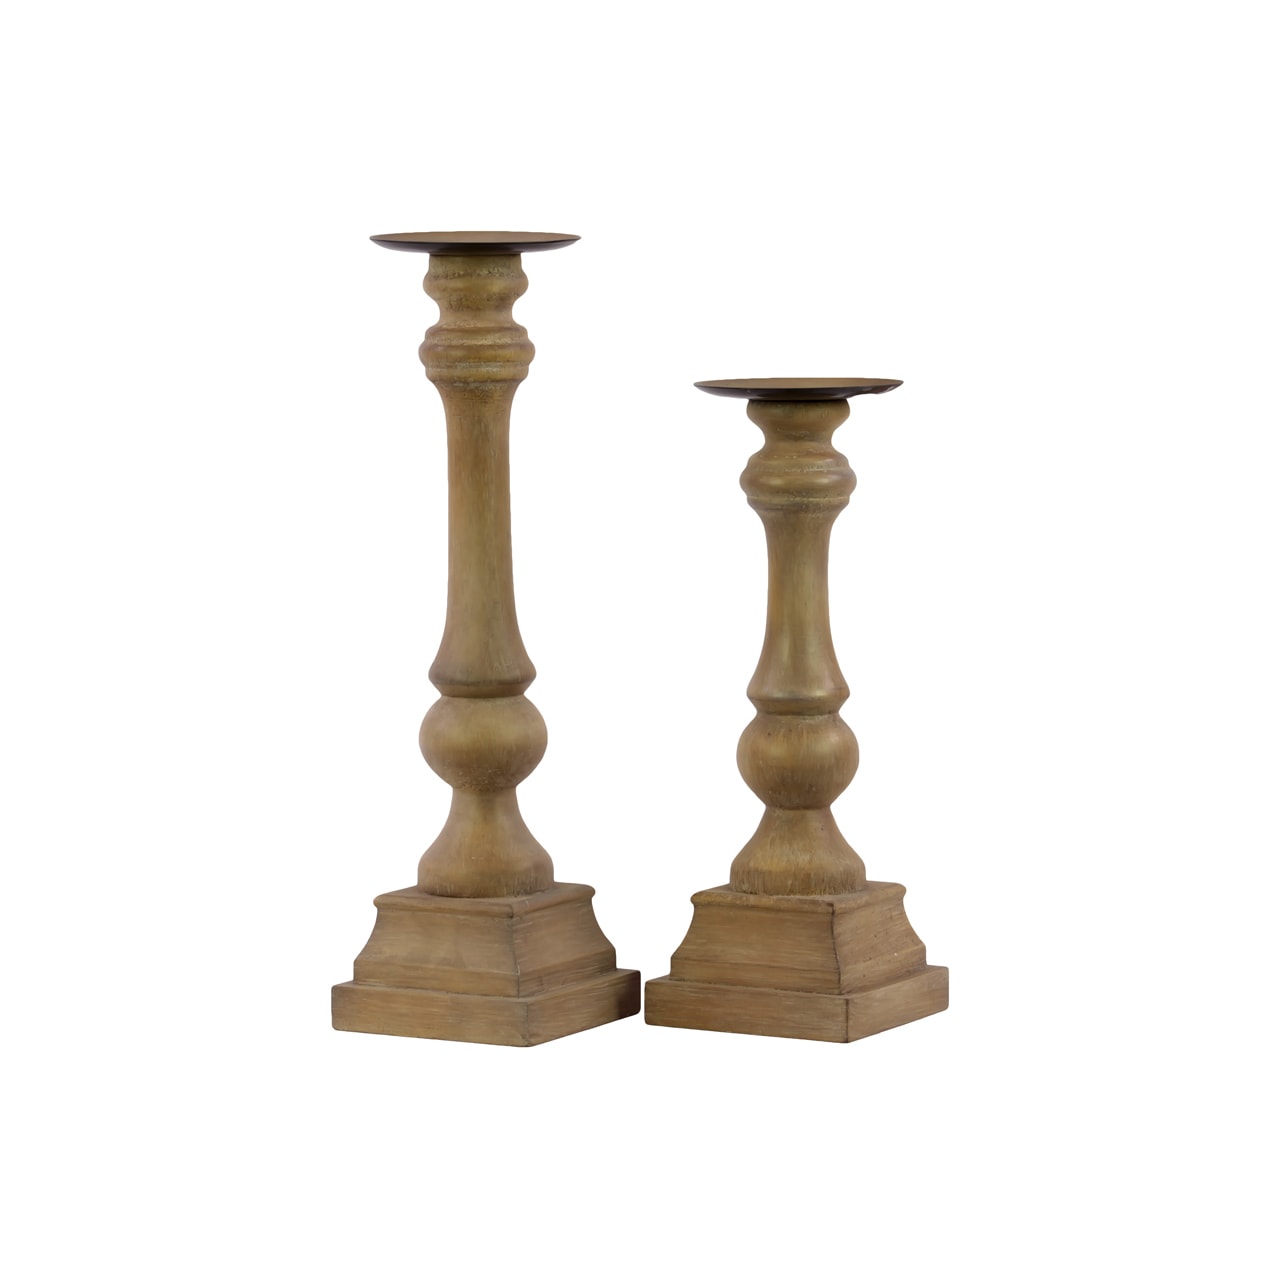 Wood Candle Holders (set Of 2) (Large holder measures 5.13 inches wide x 5.13 inches deep x 19.75 inches high; Small holder measures 5.13 inches wide x 51.3 inches deep x 17 inches highFor decorative purposes only WoodSize Large holder measures 5.13 inch